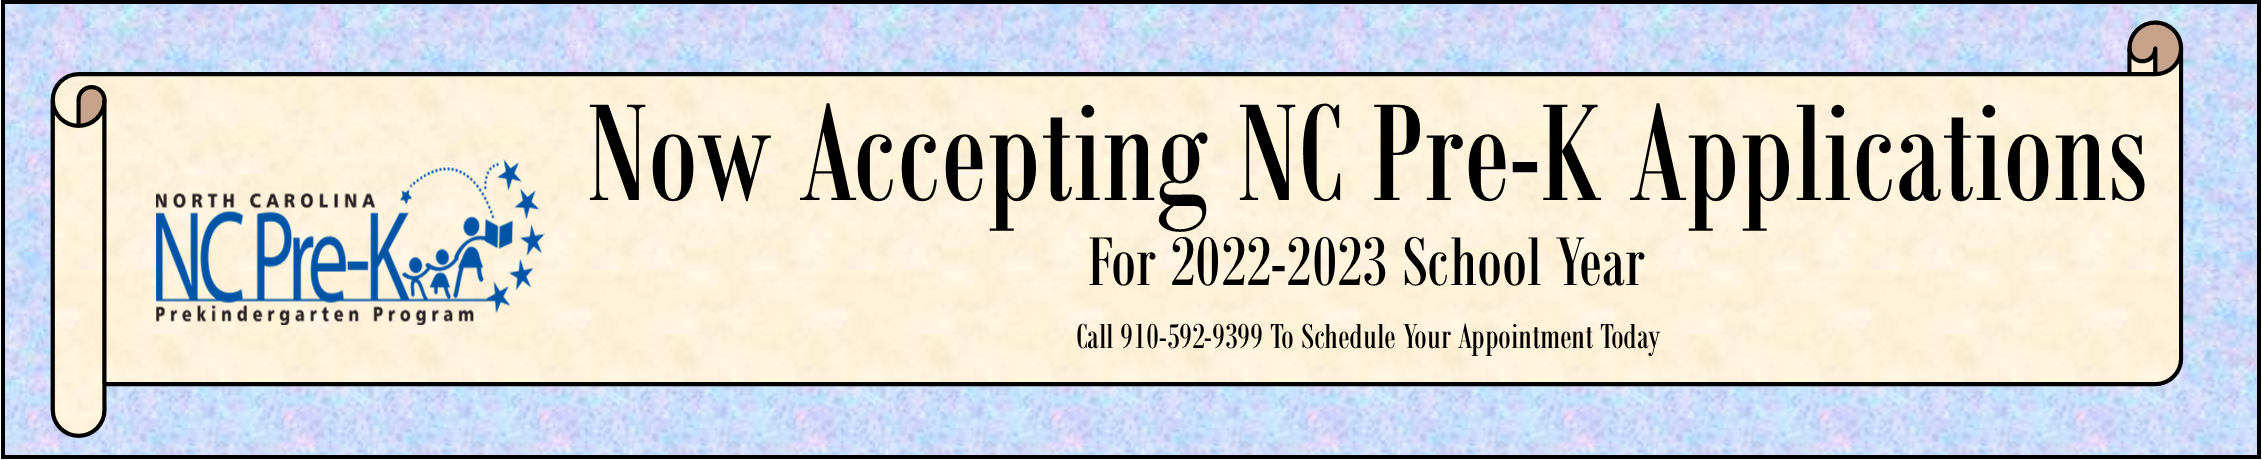 Now Accepting NC Pre-K Applications For 2022-2023 School Year Home Page Banner